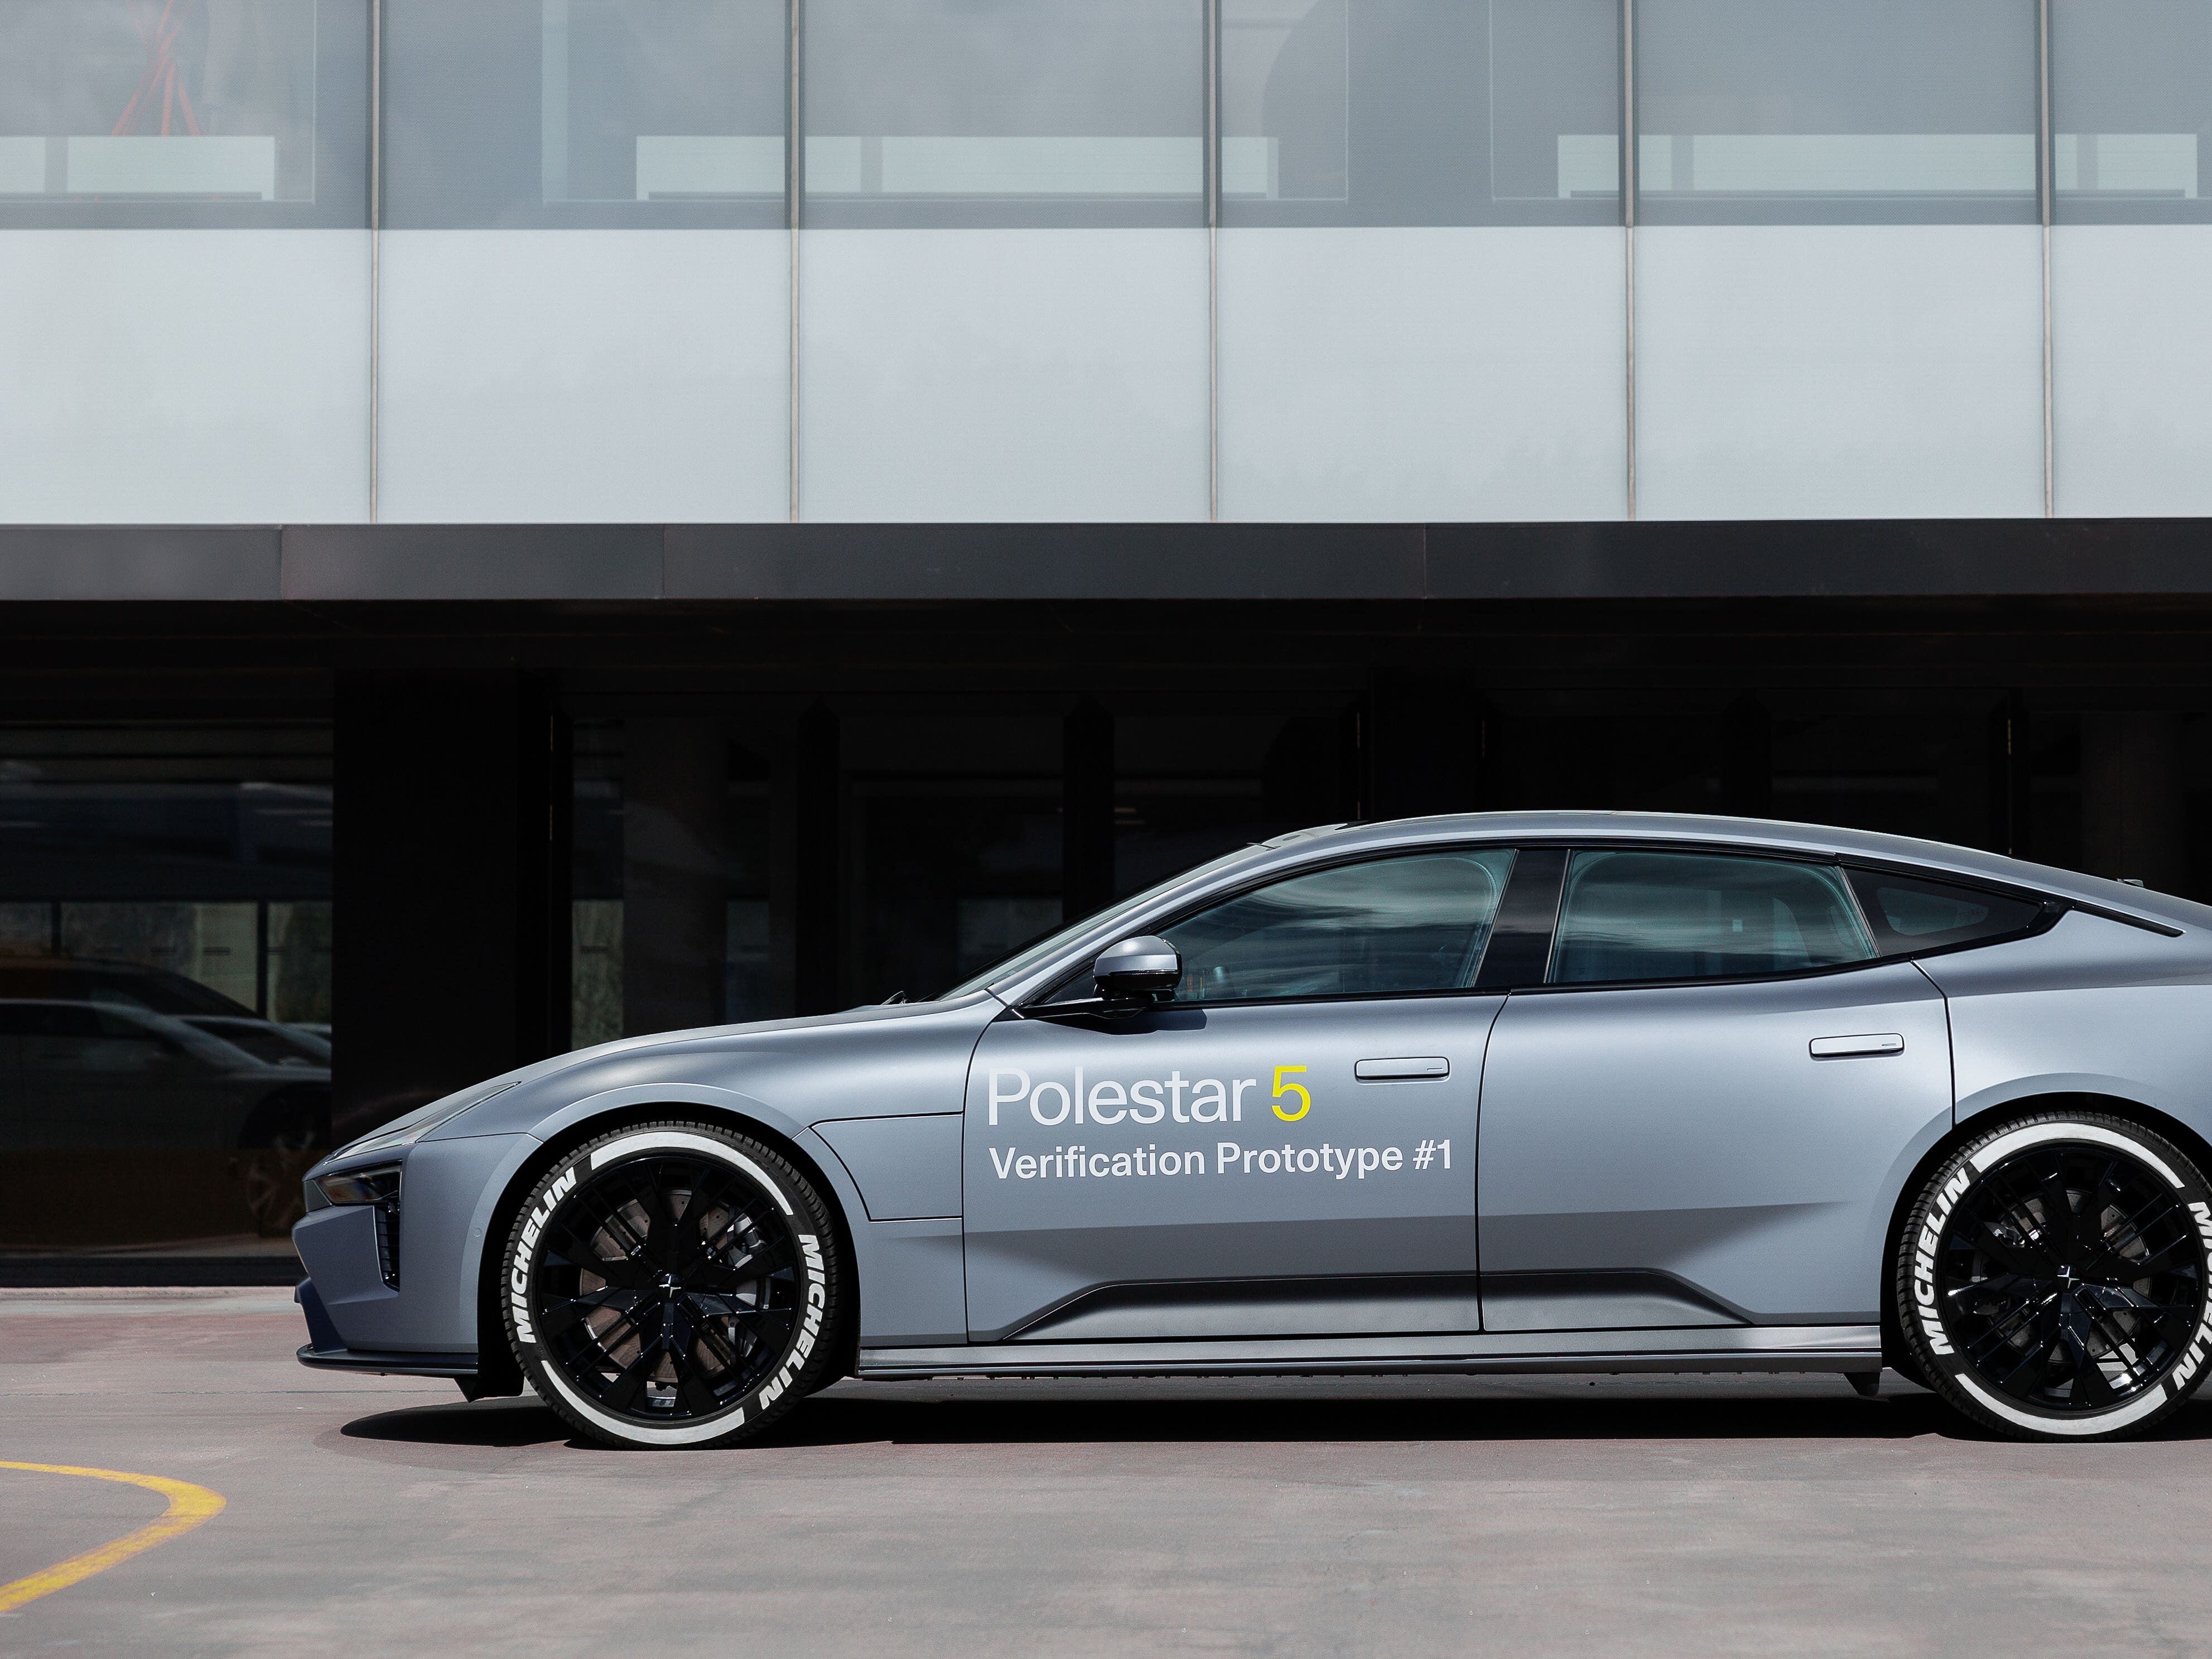 Polestar and StoreDot develop record breaking charging time for EVs